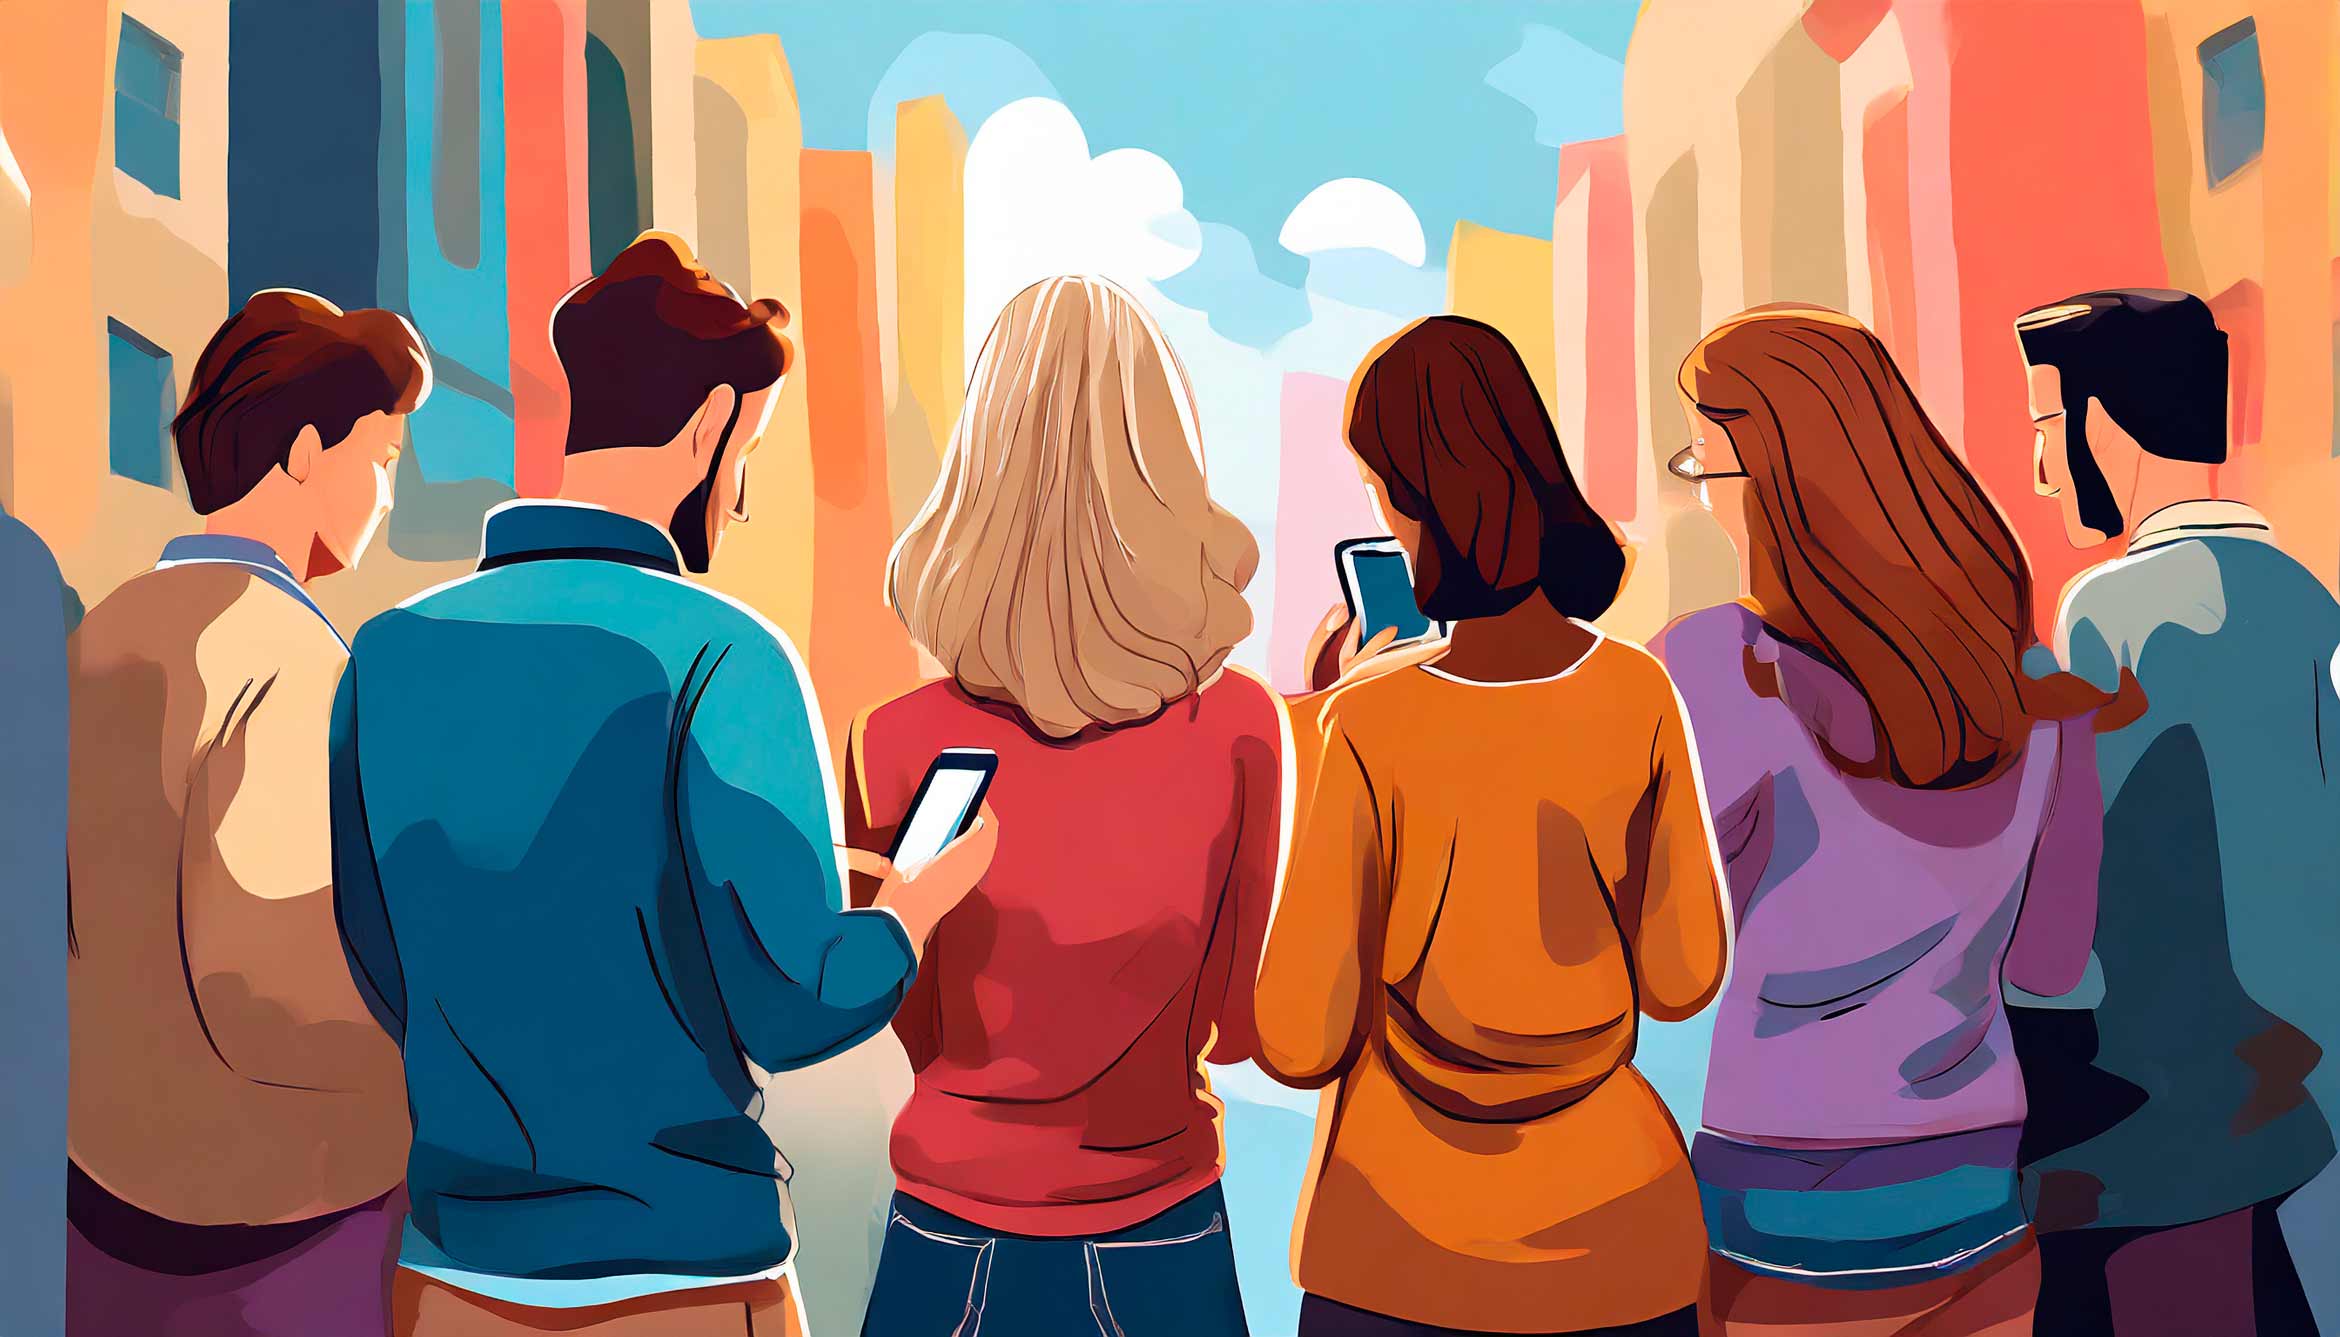 Bright illustration of a series of adults looking at cell phones